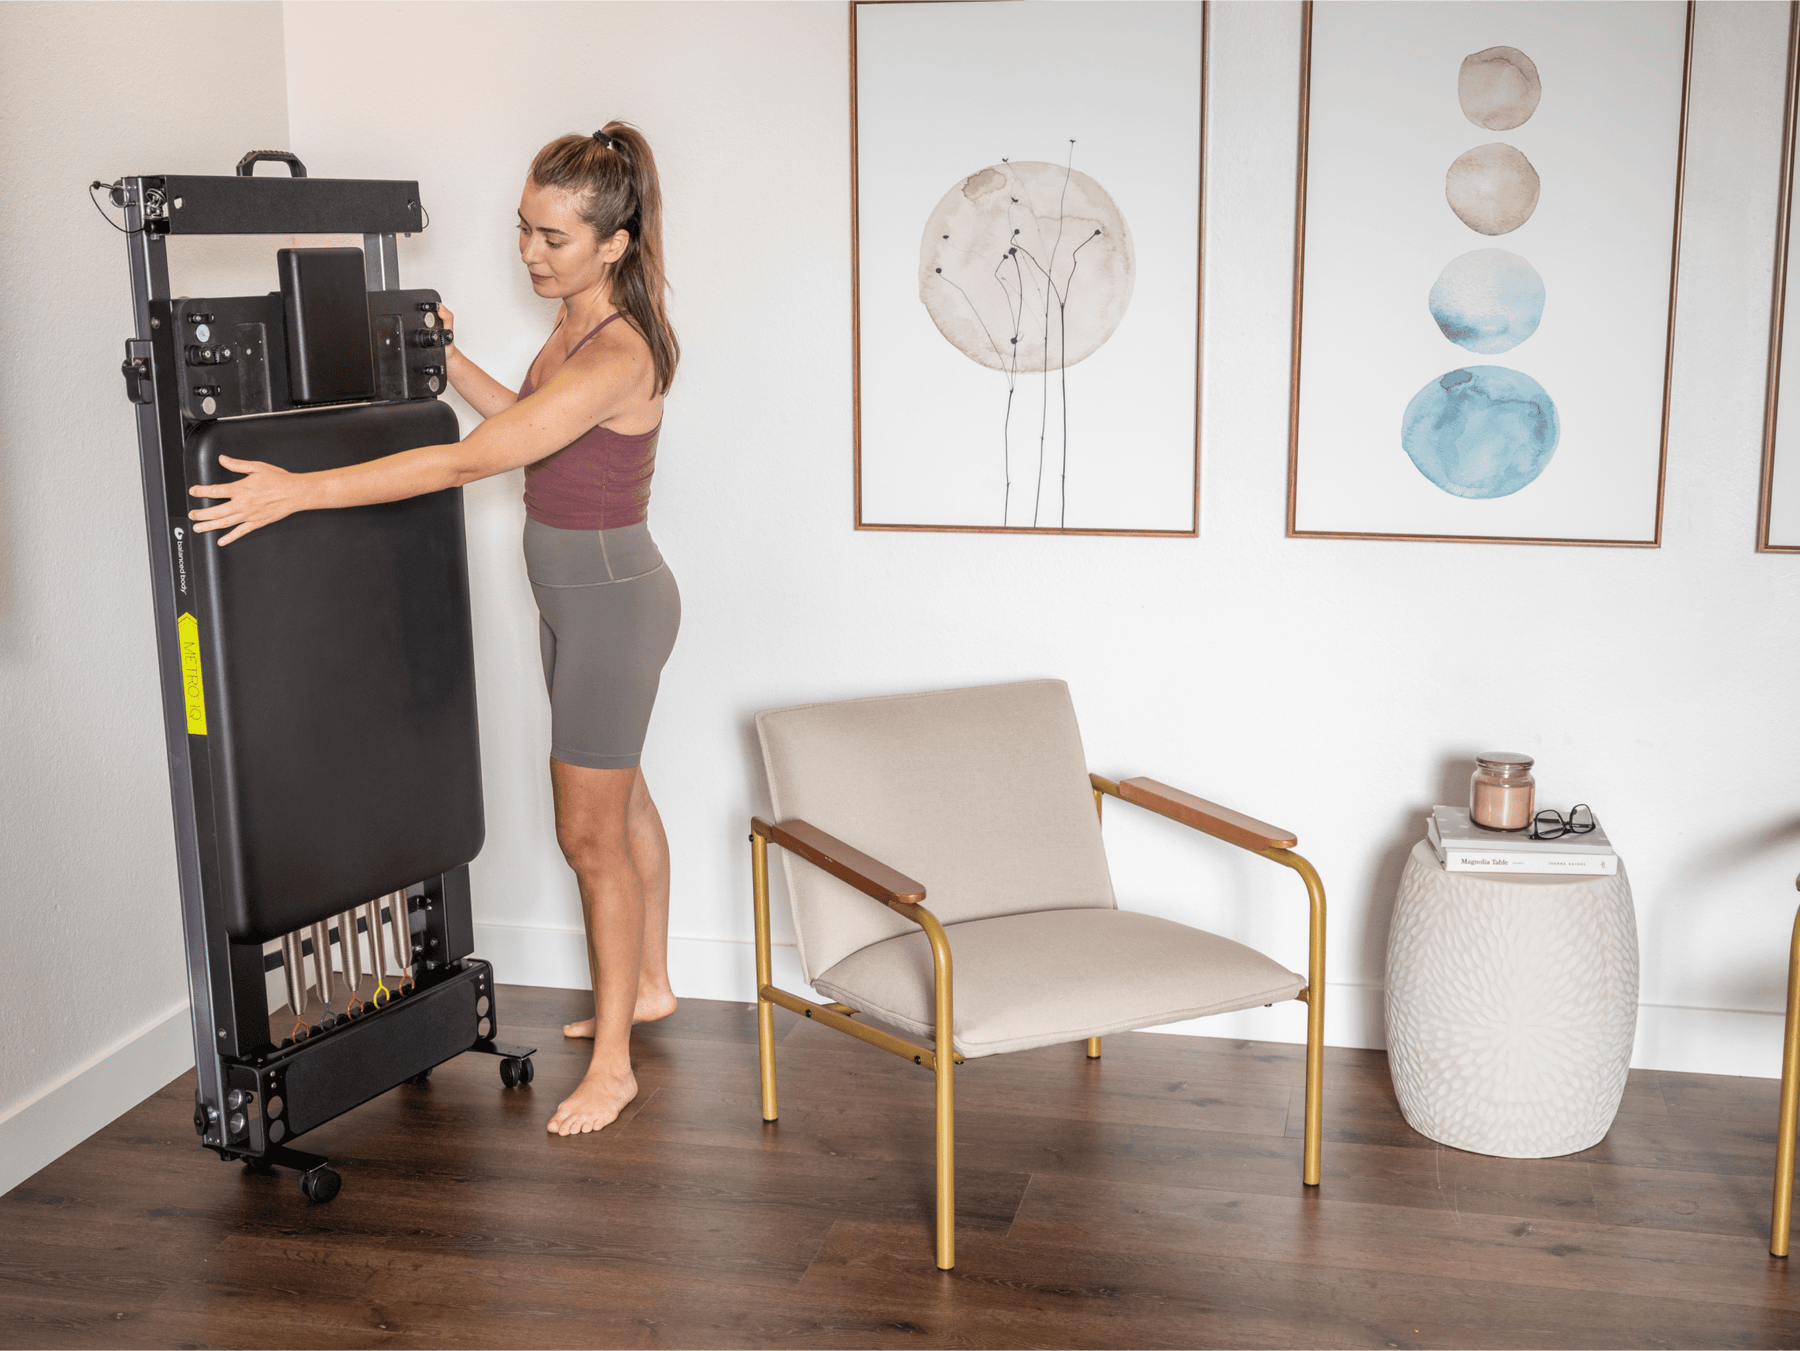 Balanced Body Studio Reformer with Tower and Mat – Northern Fitness